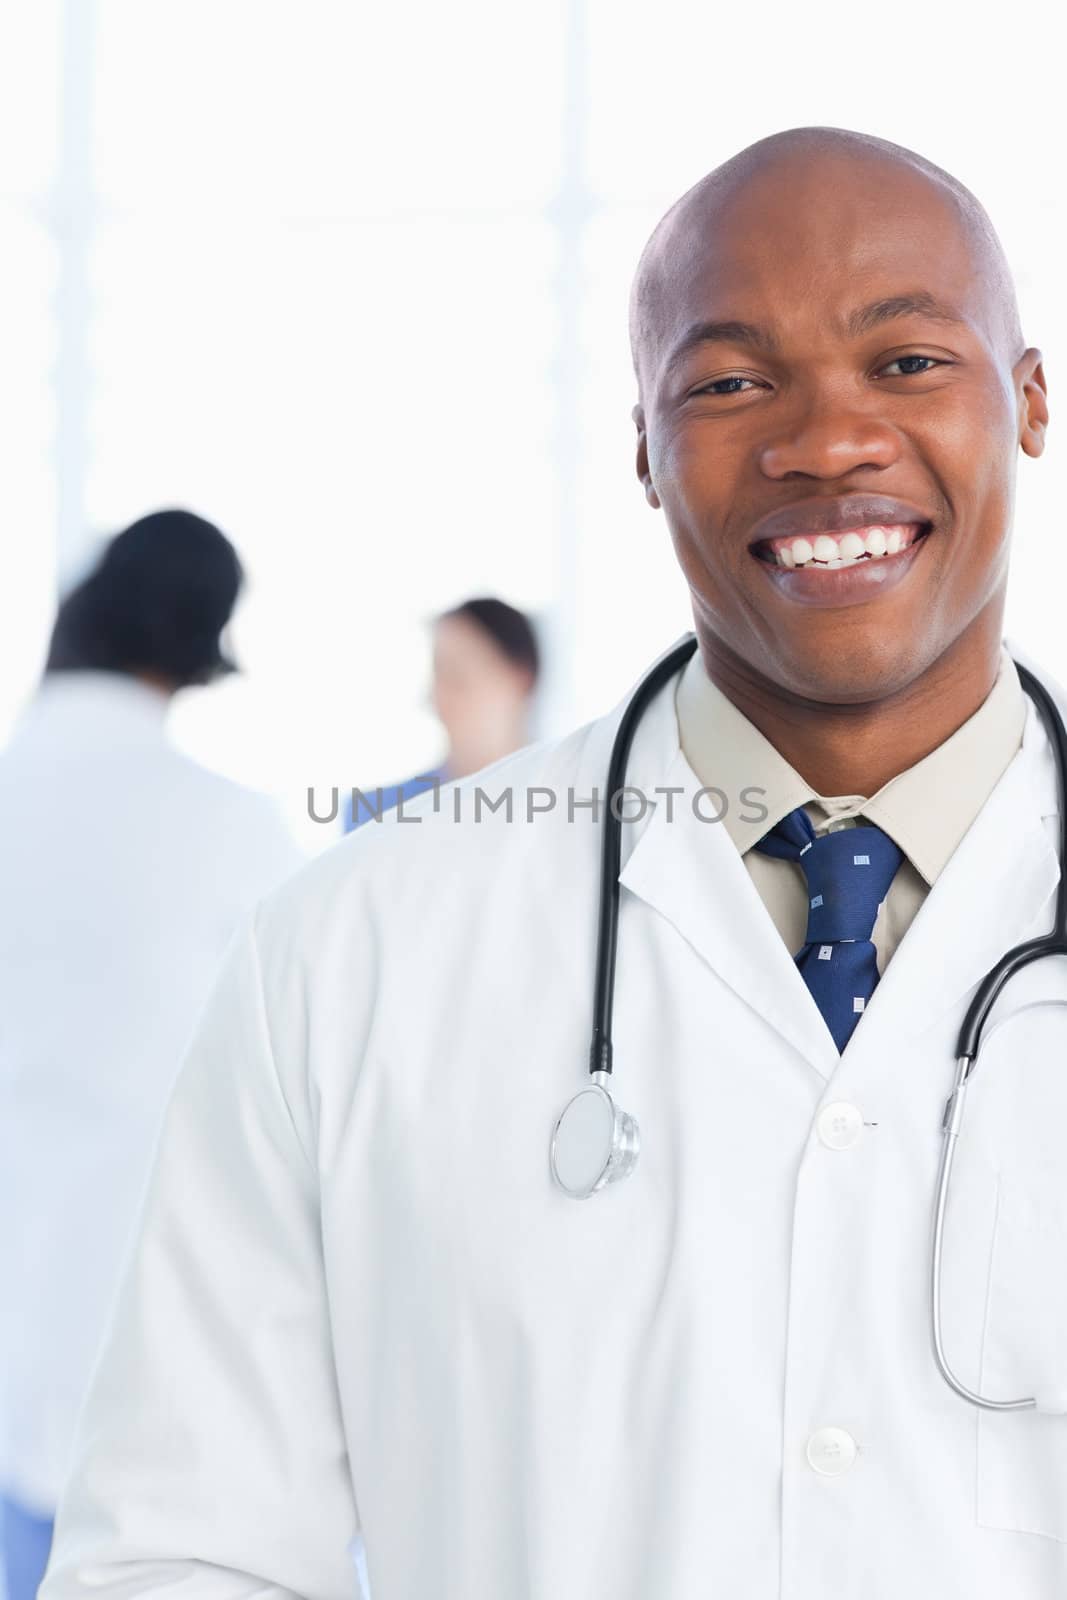 Medical intern showing a beaming smile in front of his team by Wavebreakmedia